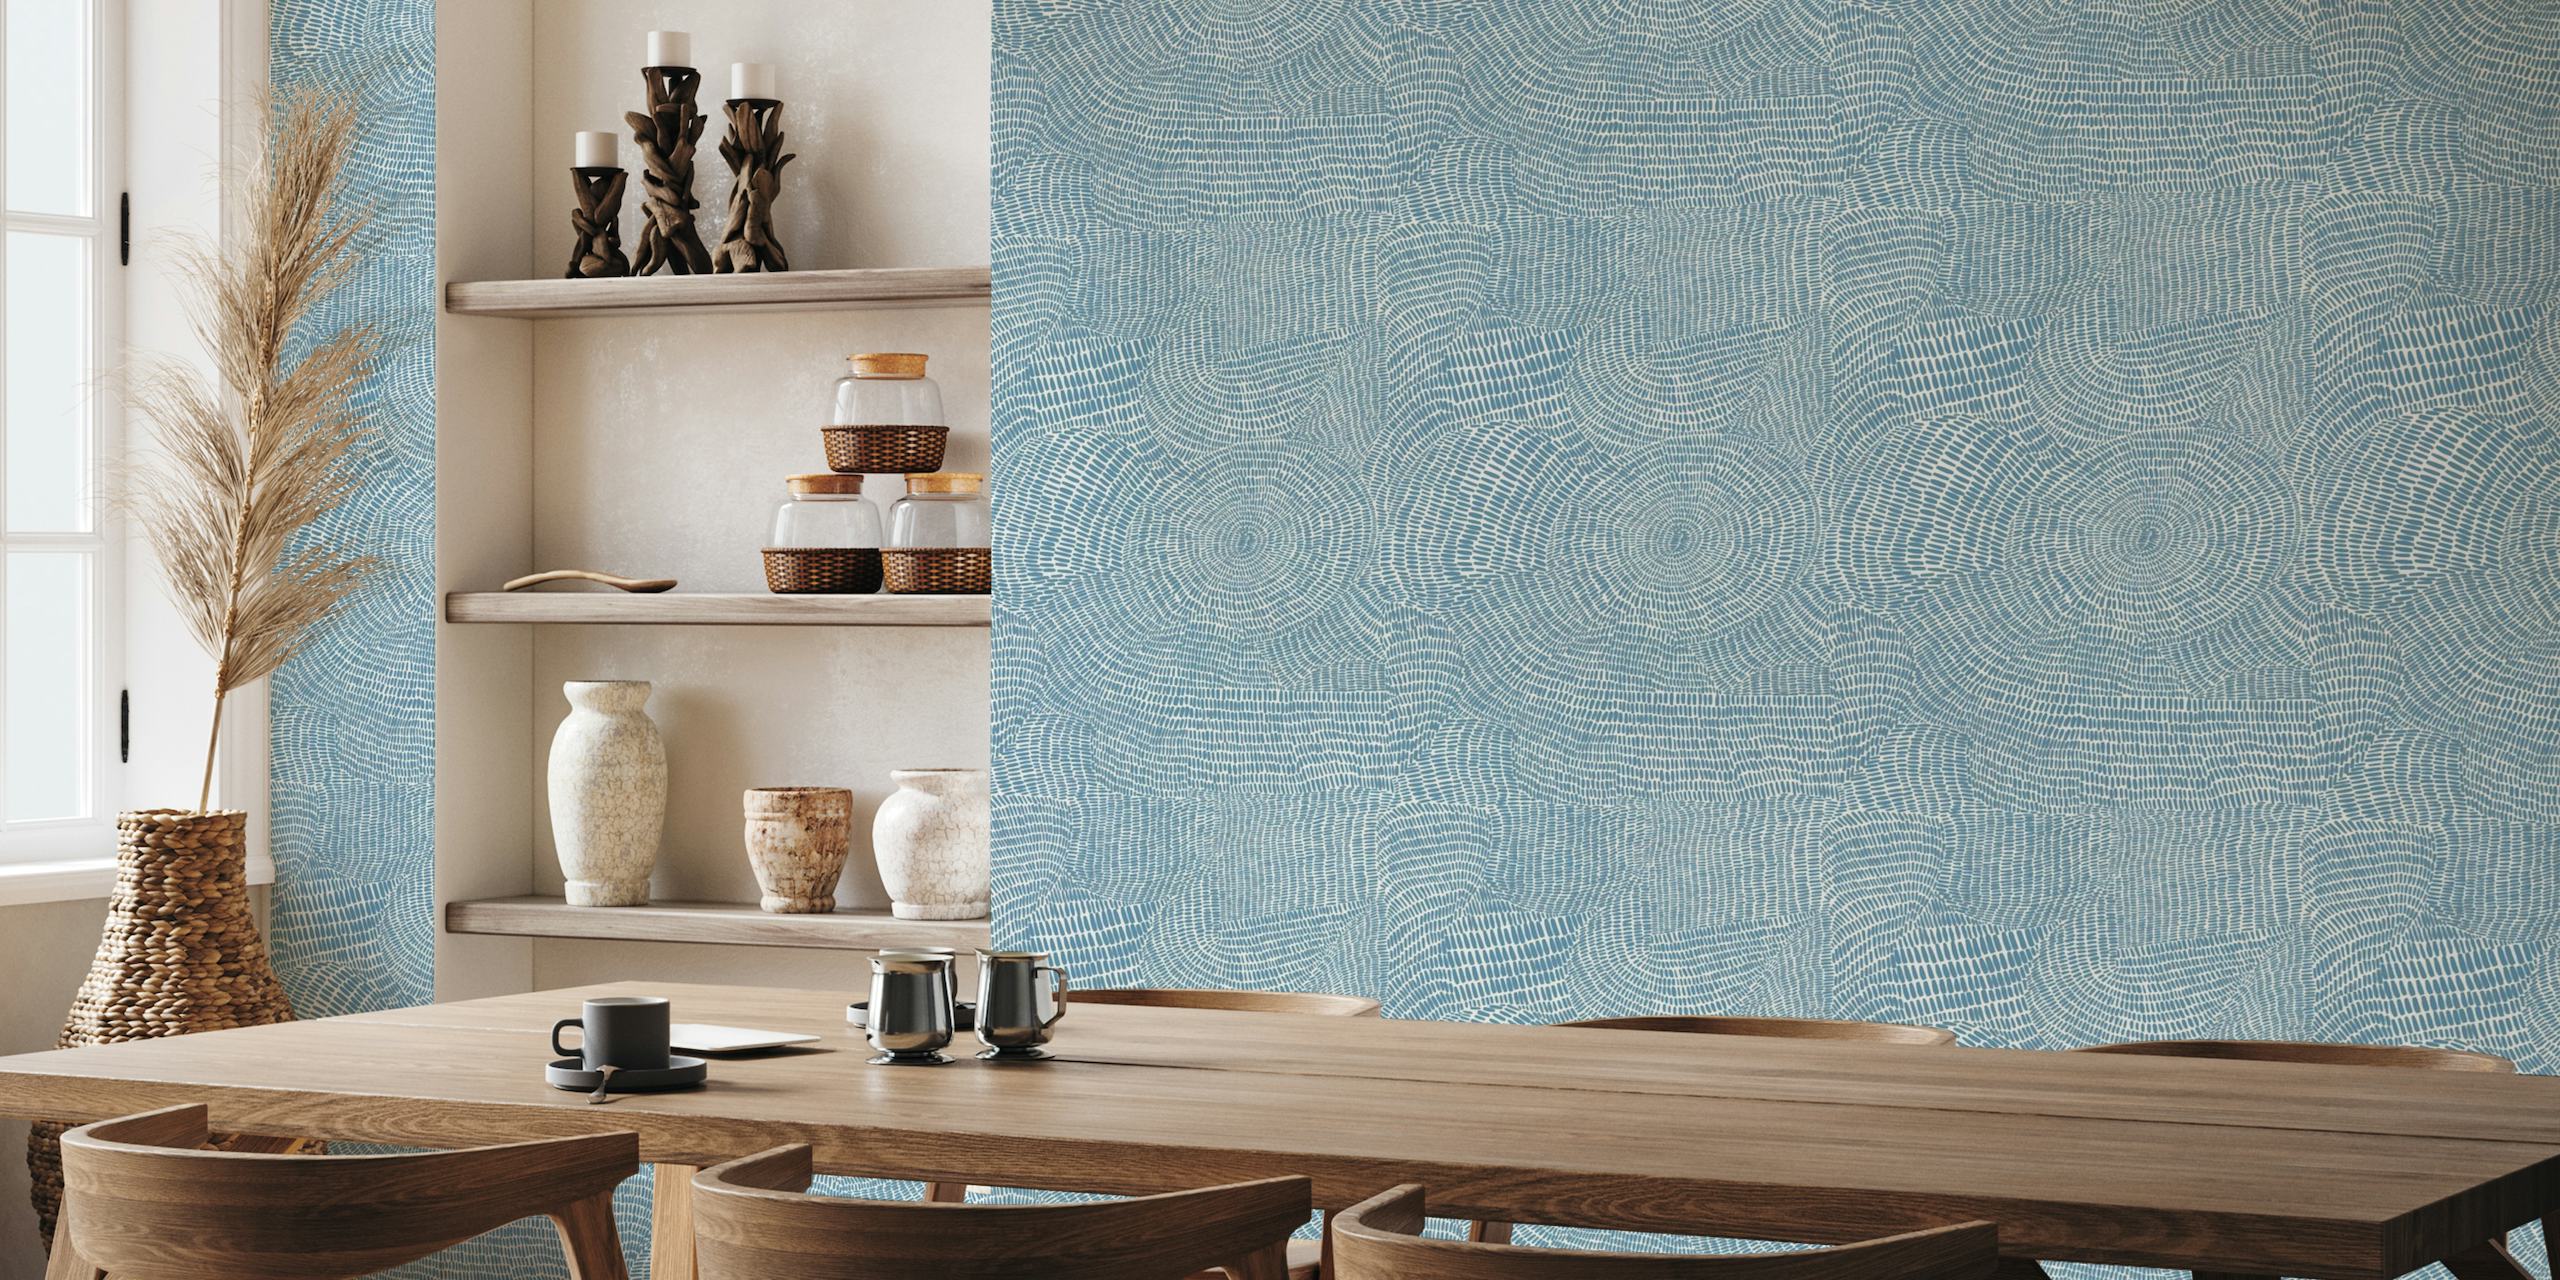 Abstract blue strokes wall mural featuring rhythmic, undulating patterns